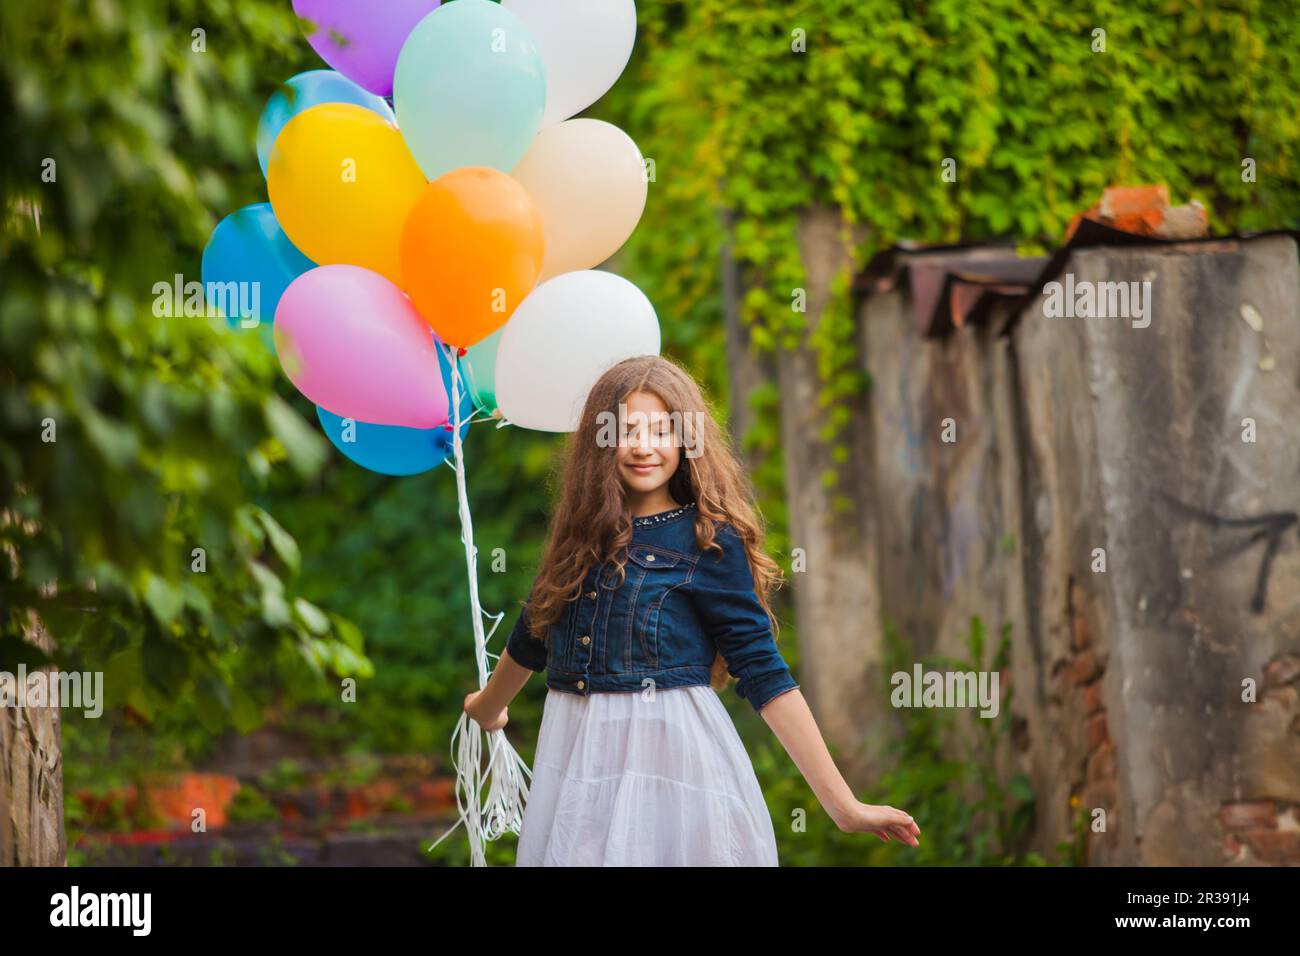 Girl is running with colorful balloons outdoors Stock Photo